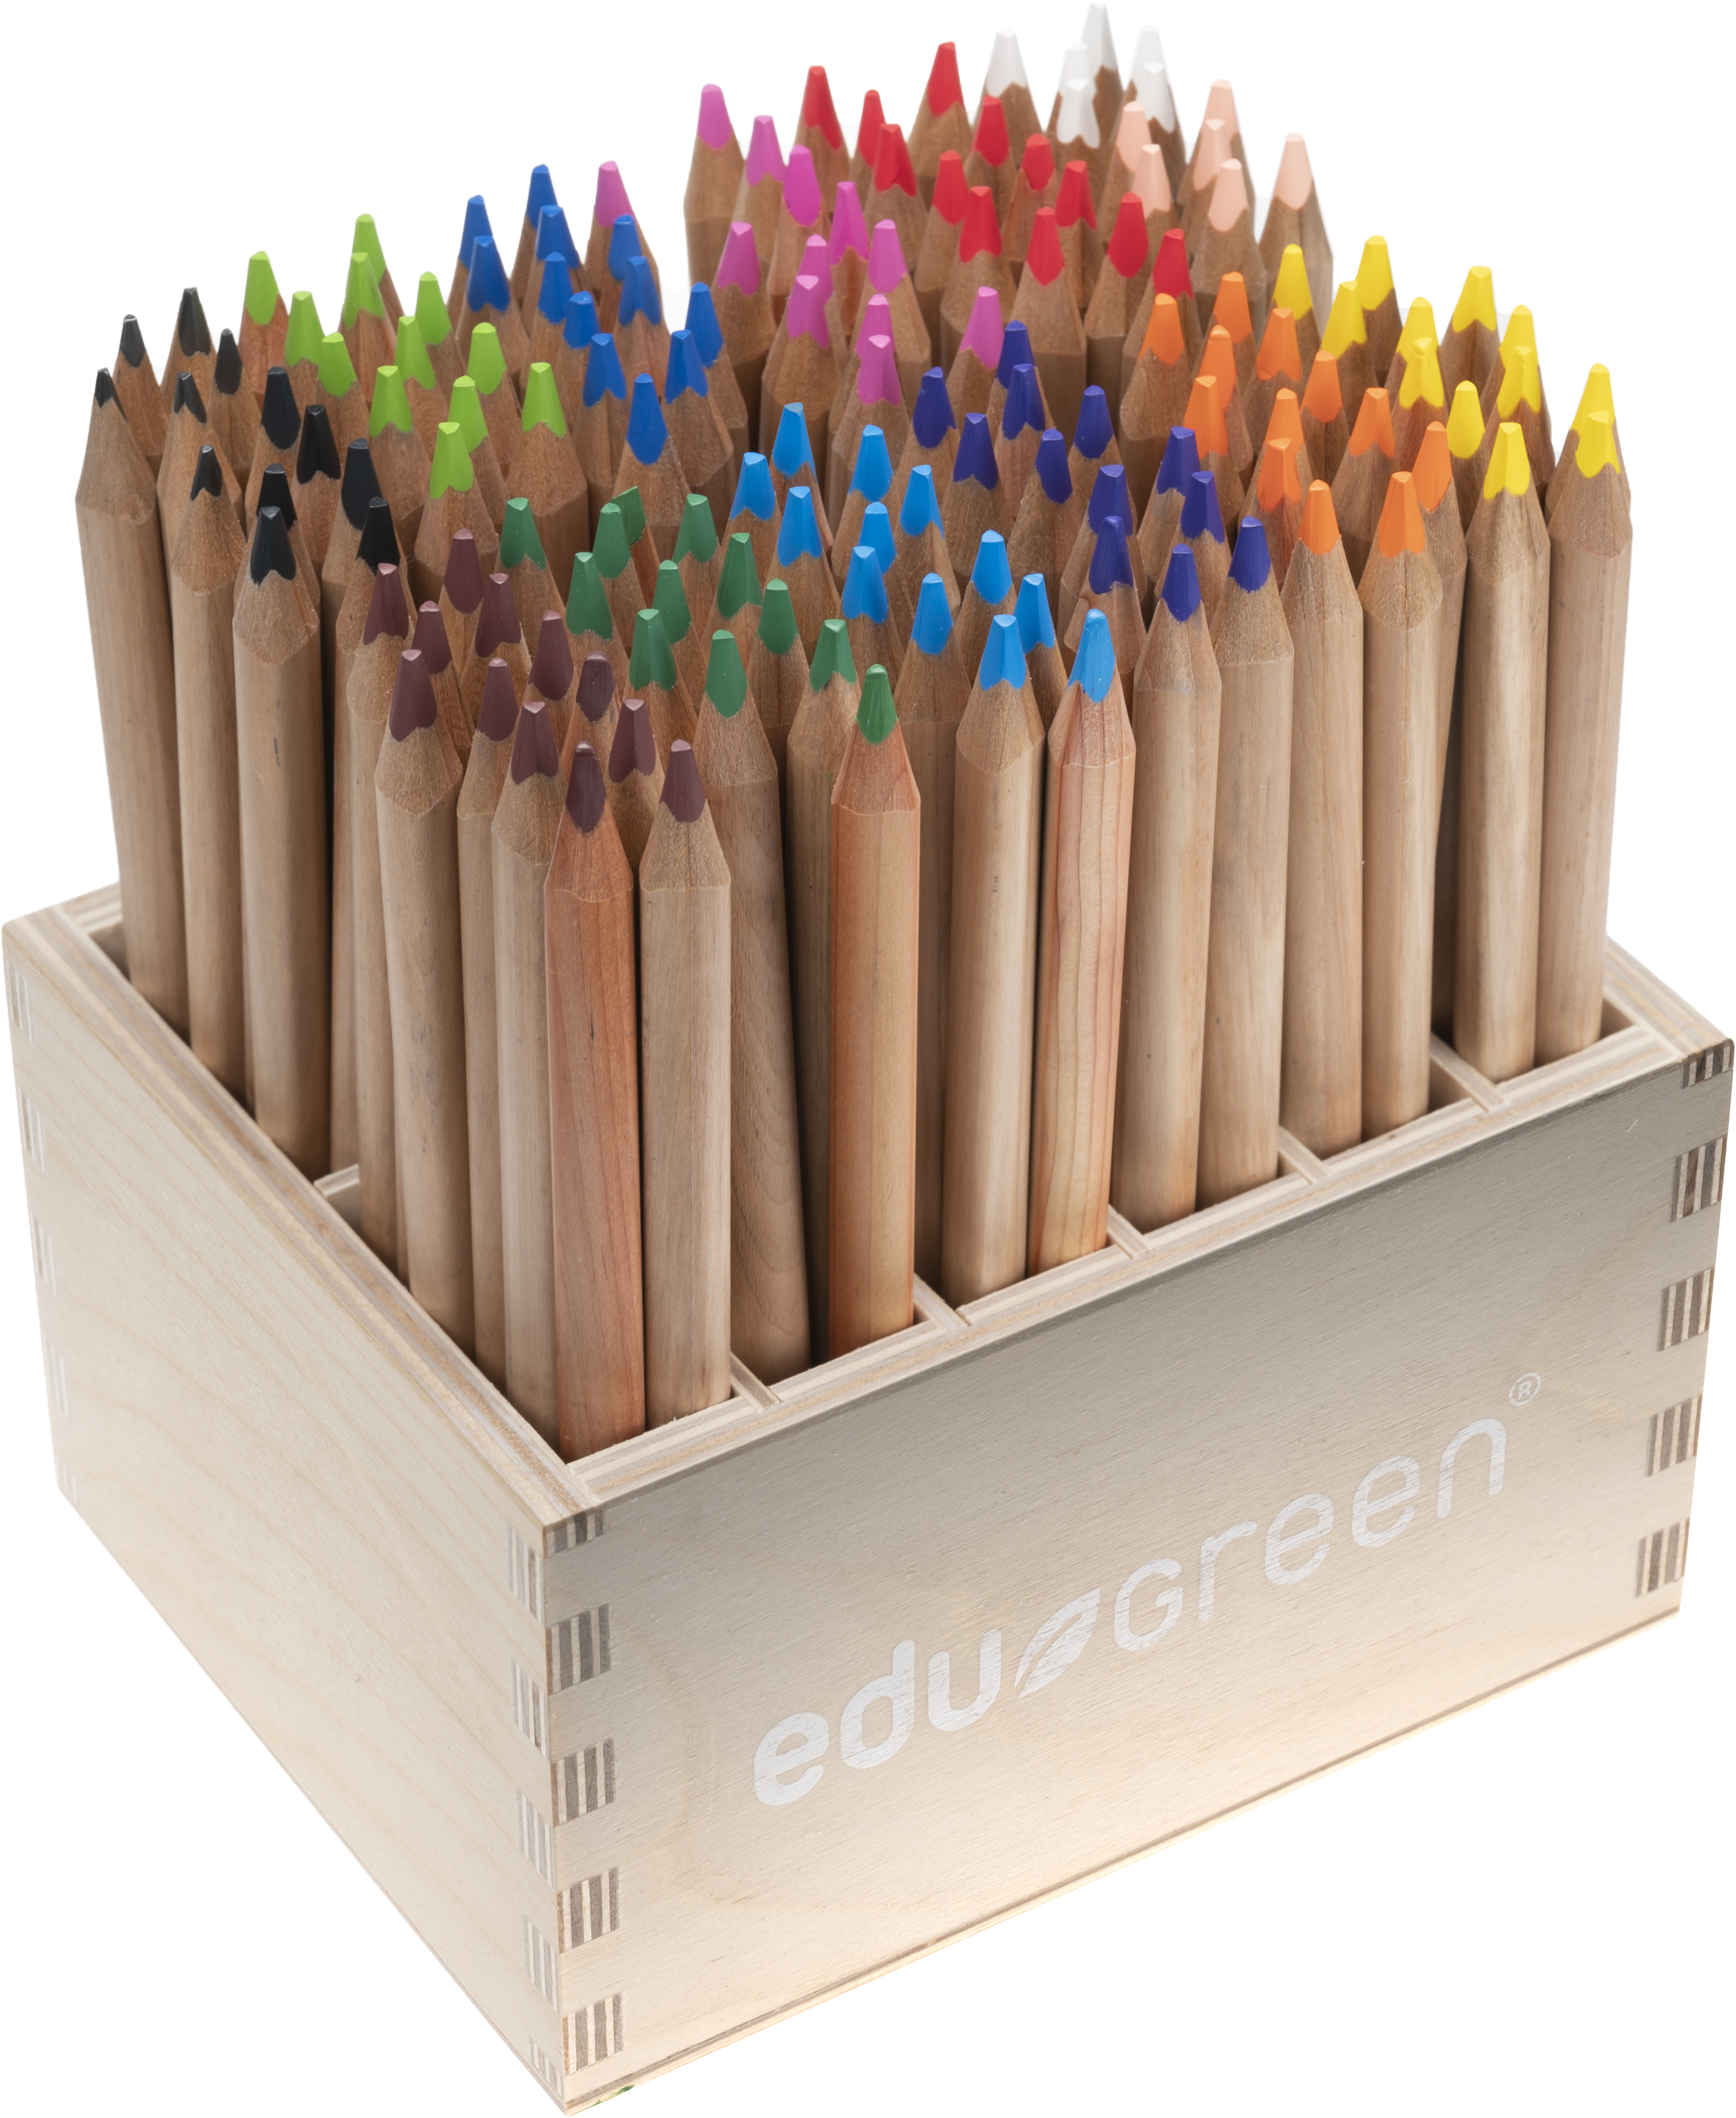 edugreen colored pencil tri wooden display